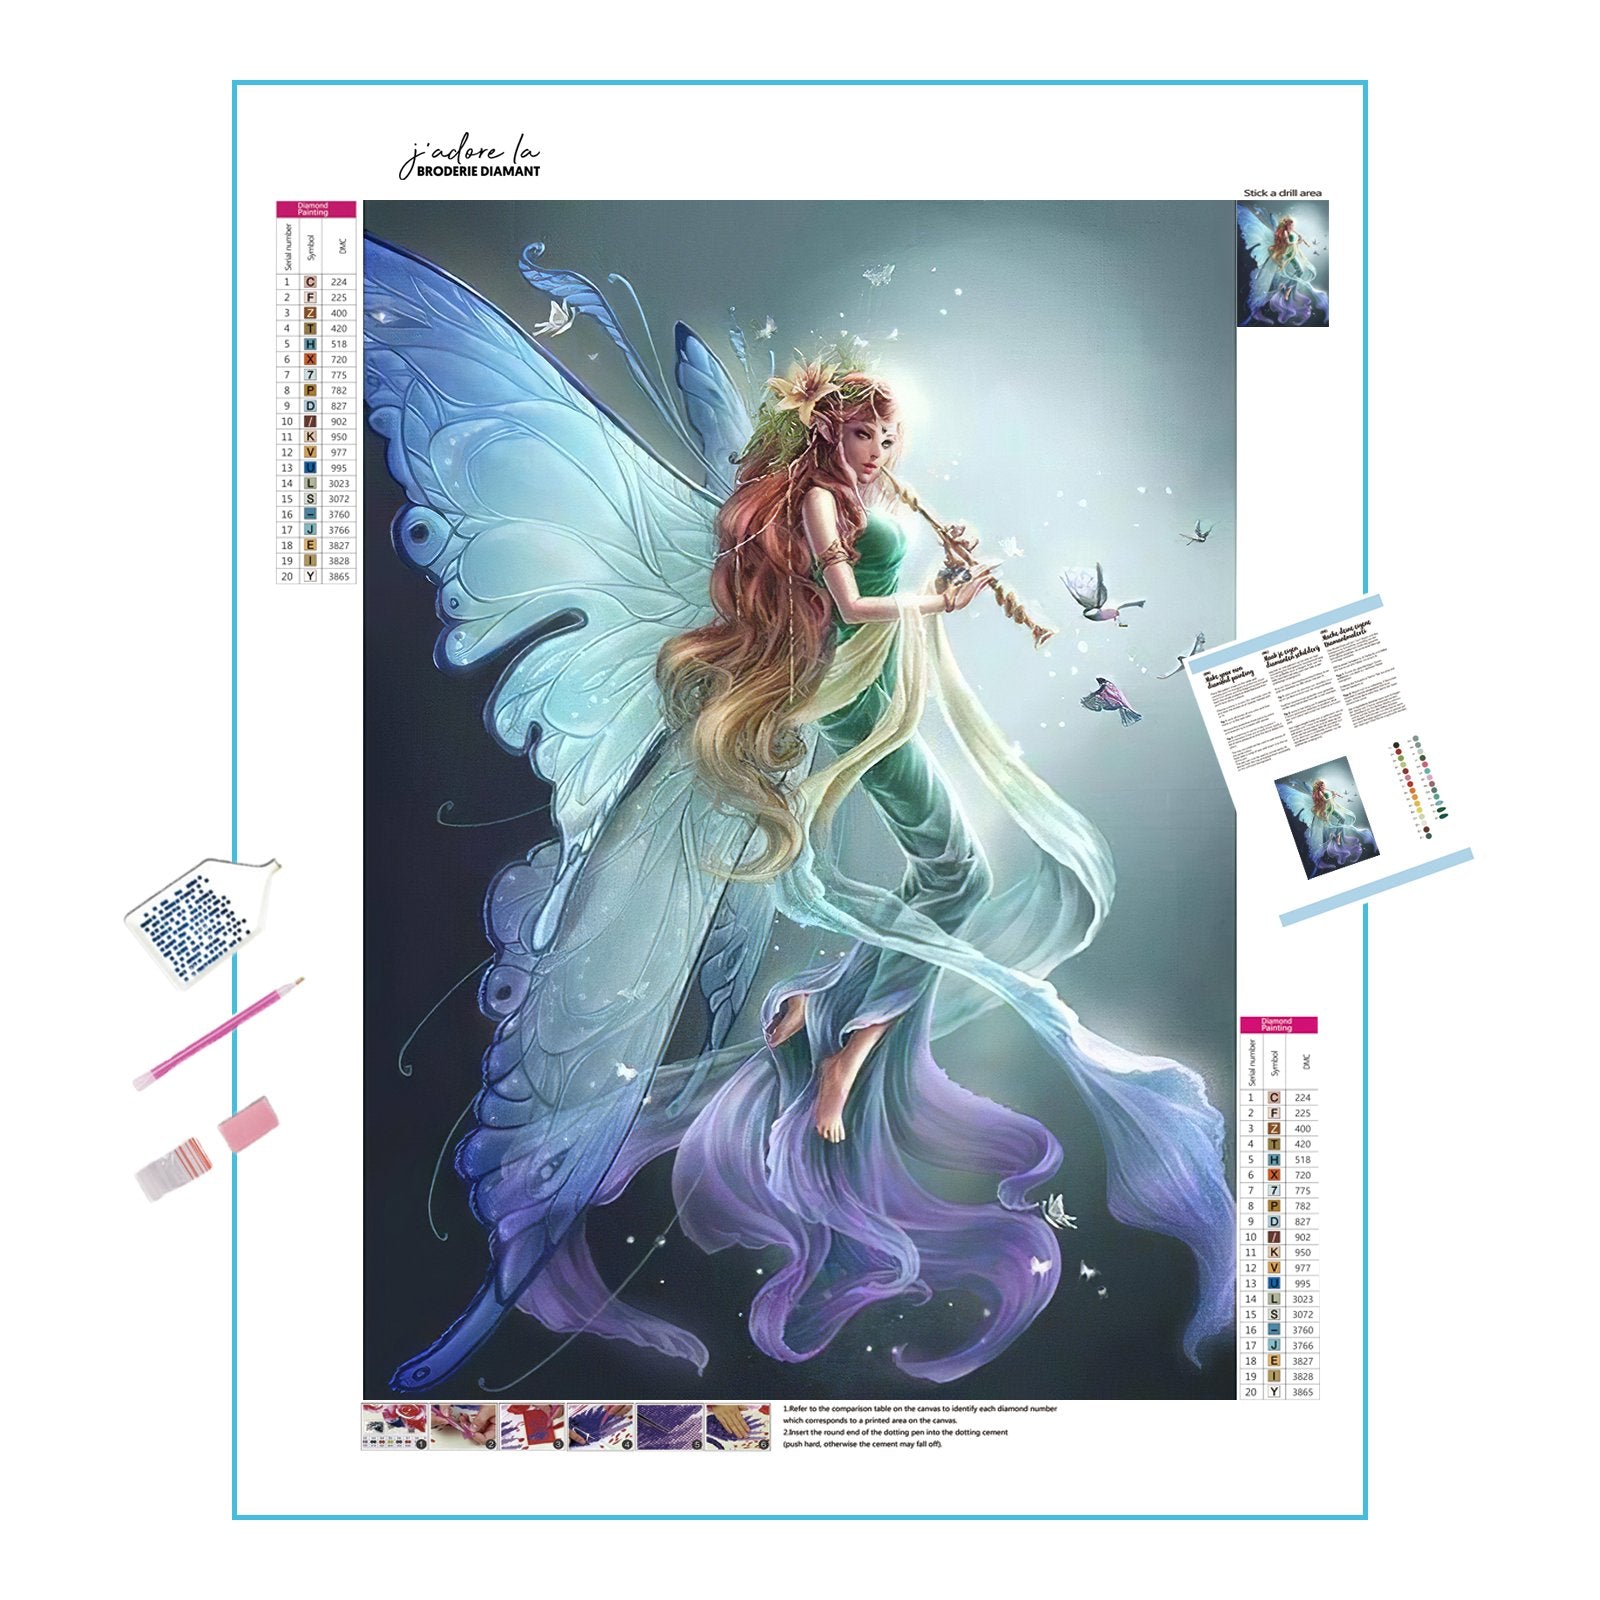 Capture a serene moment with Girl and Butterfly art.Girl And Butterfly - Diamondartlove